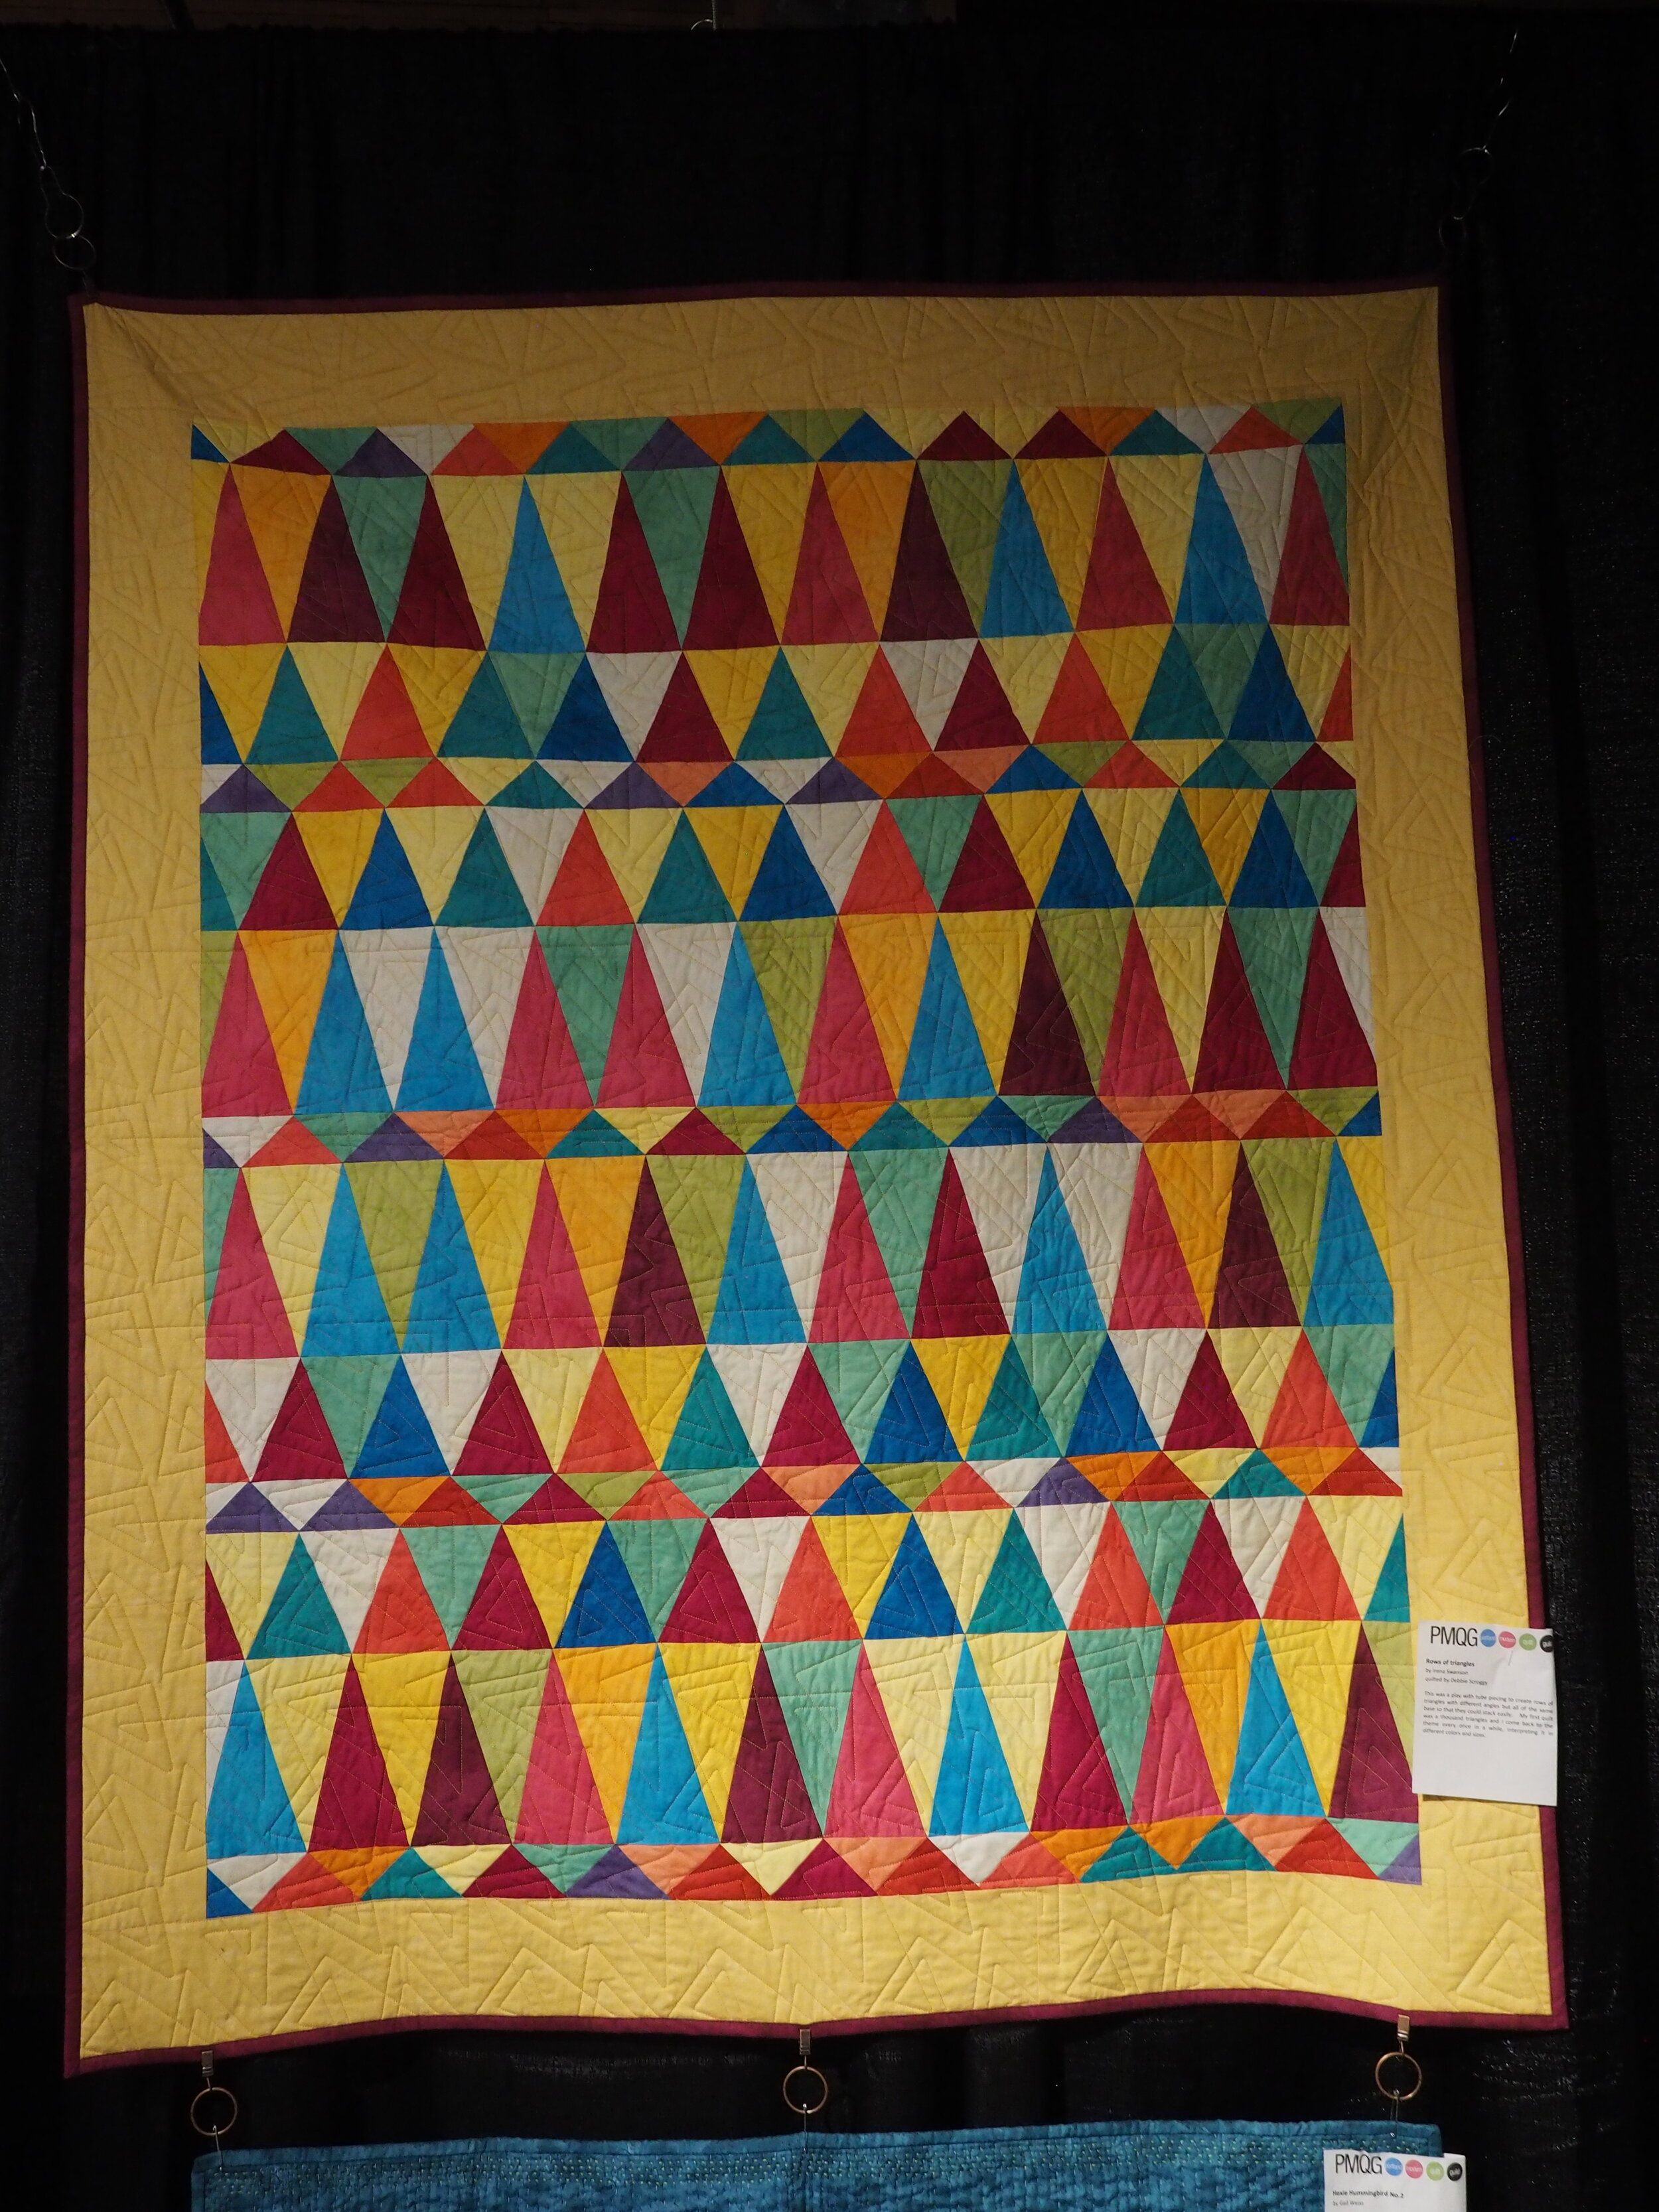 Rows of Triangles by Irena Swanson